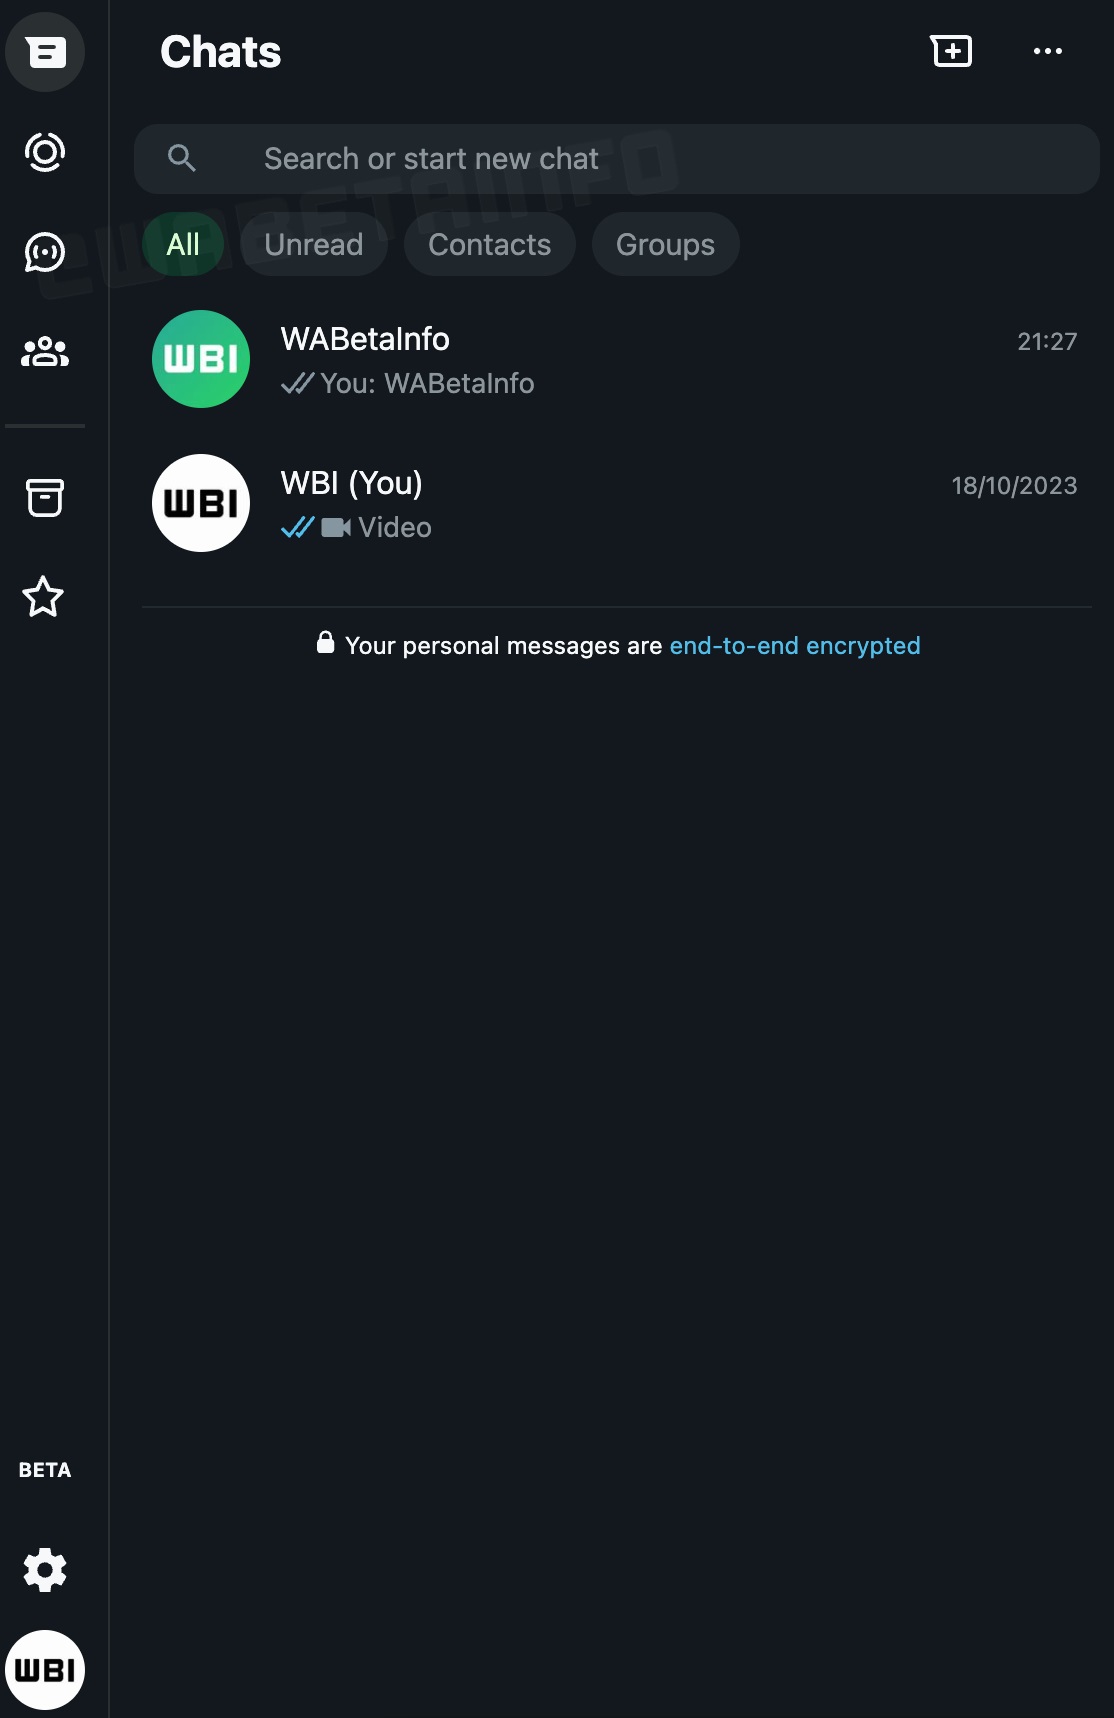 This is how the new WhatsApp web interface looks with the new dark theme. Image credits: WaBetaInfo.